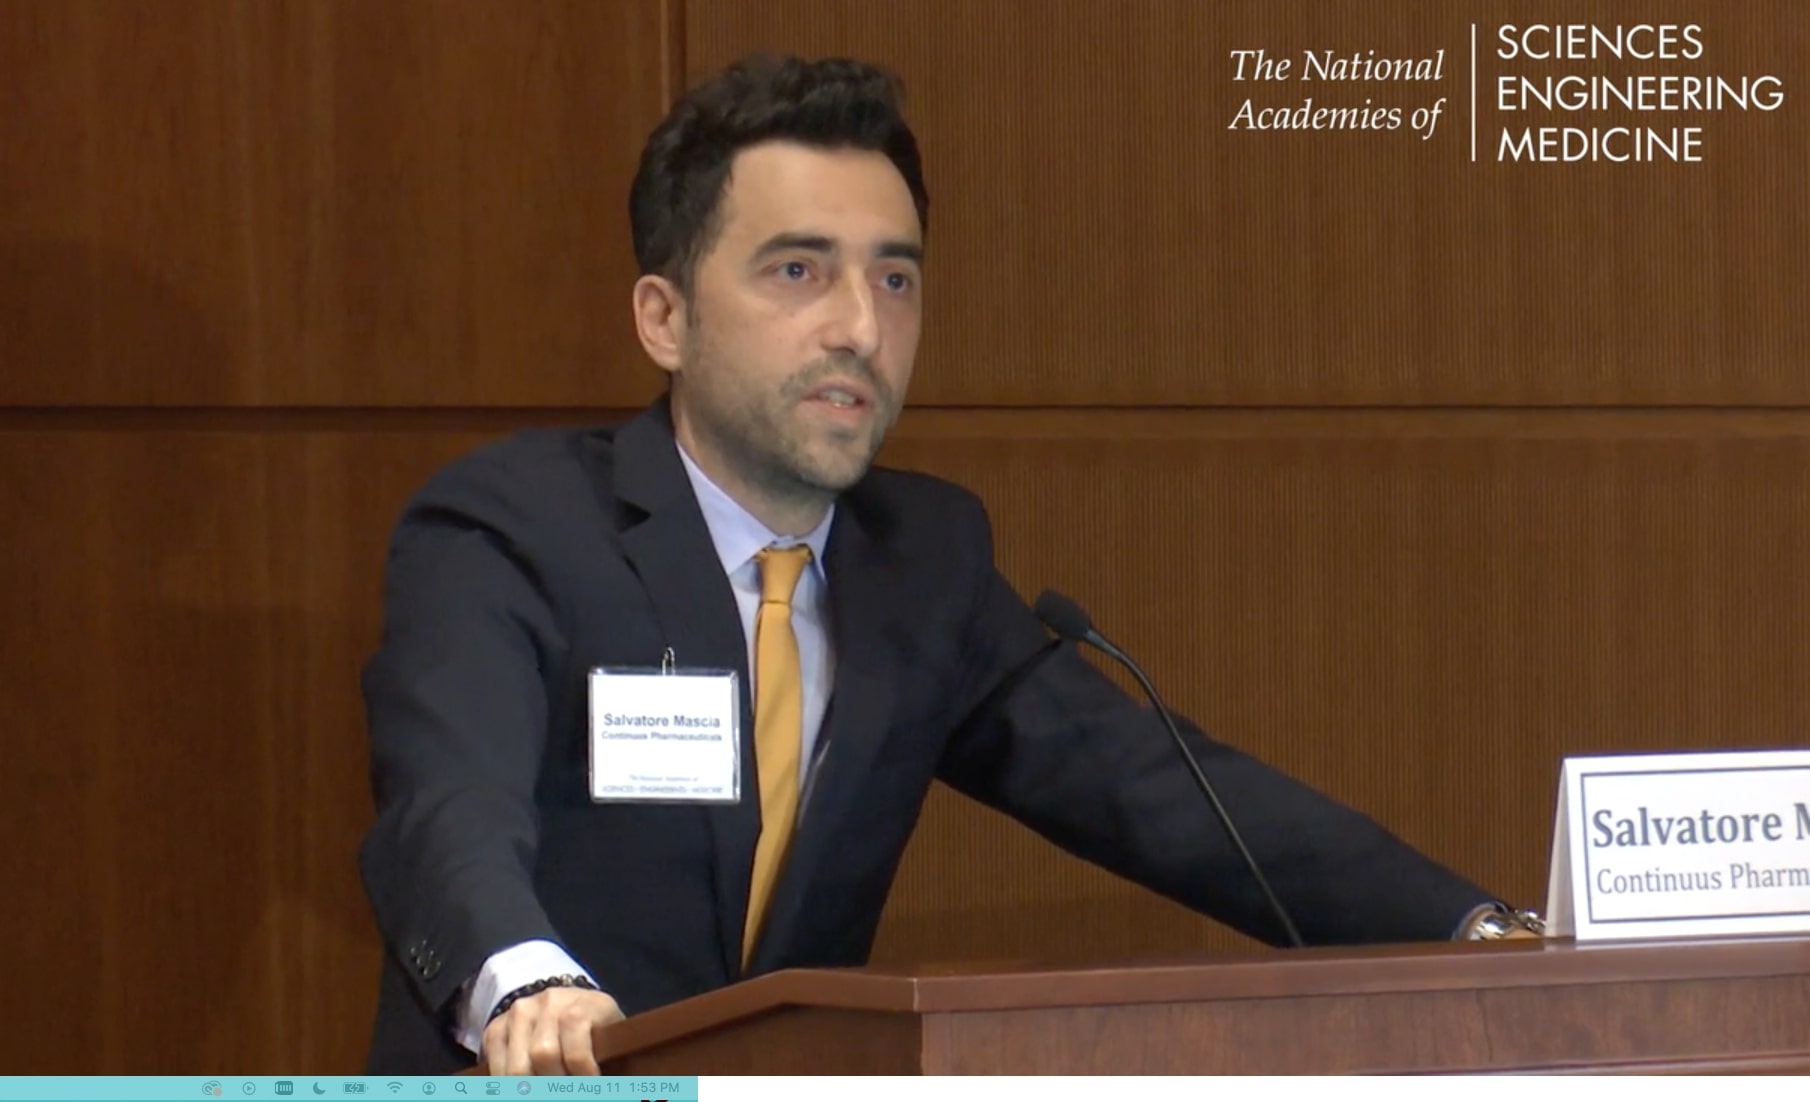 Salvatore Mascia presents at National Academy of Sciences